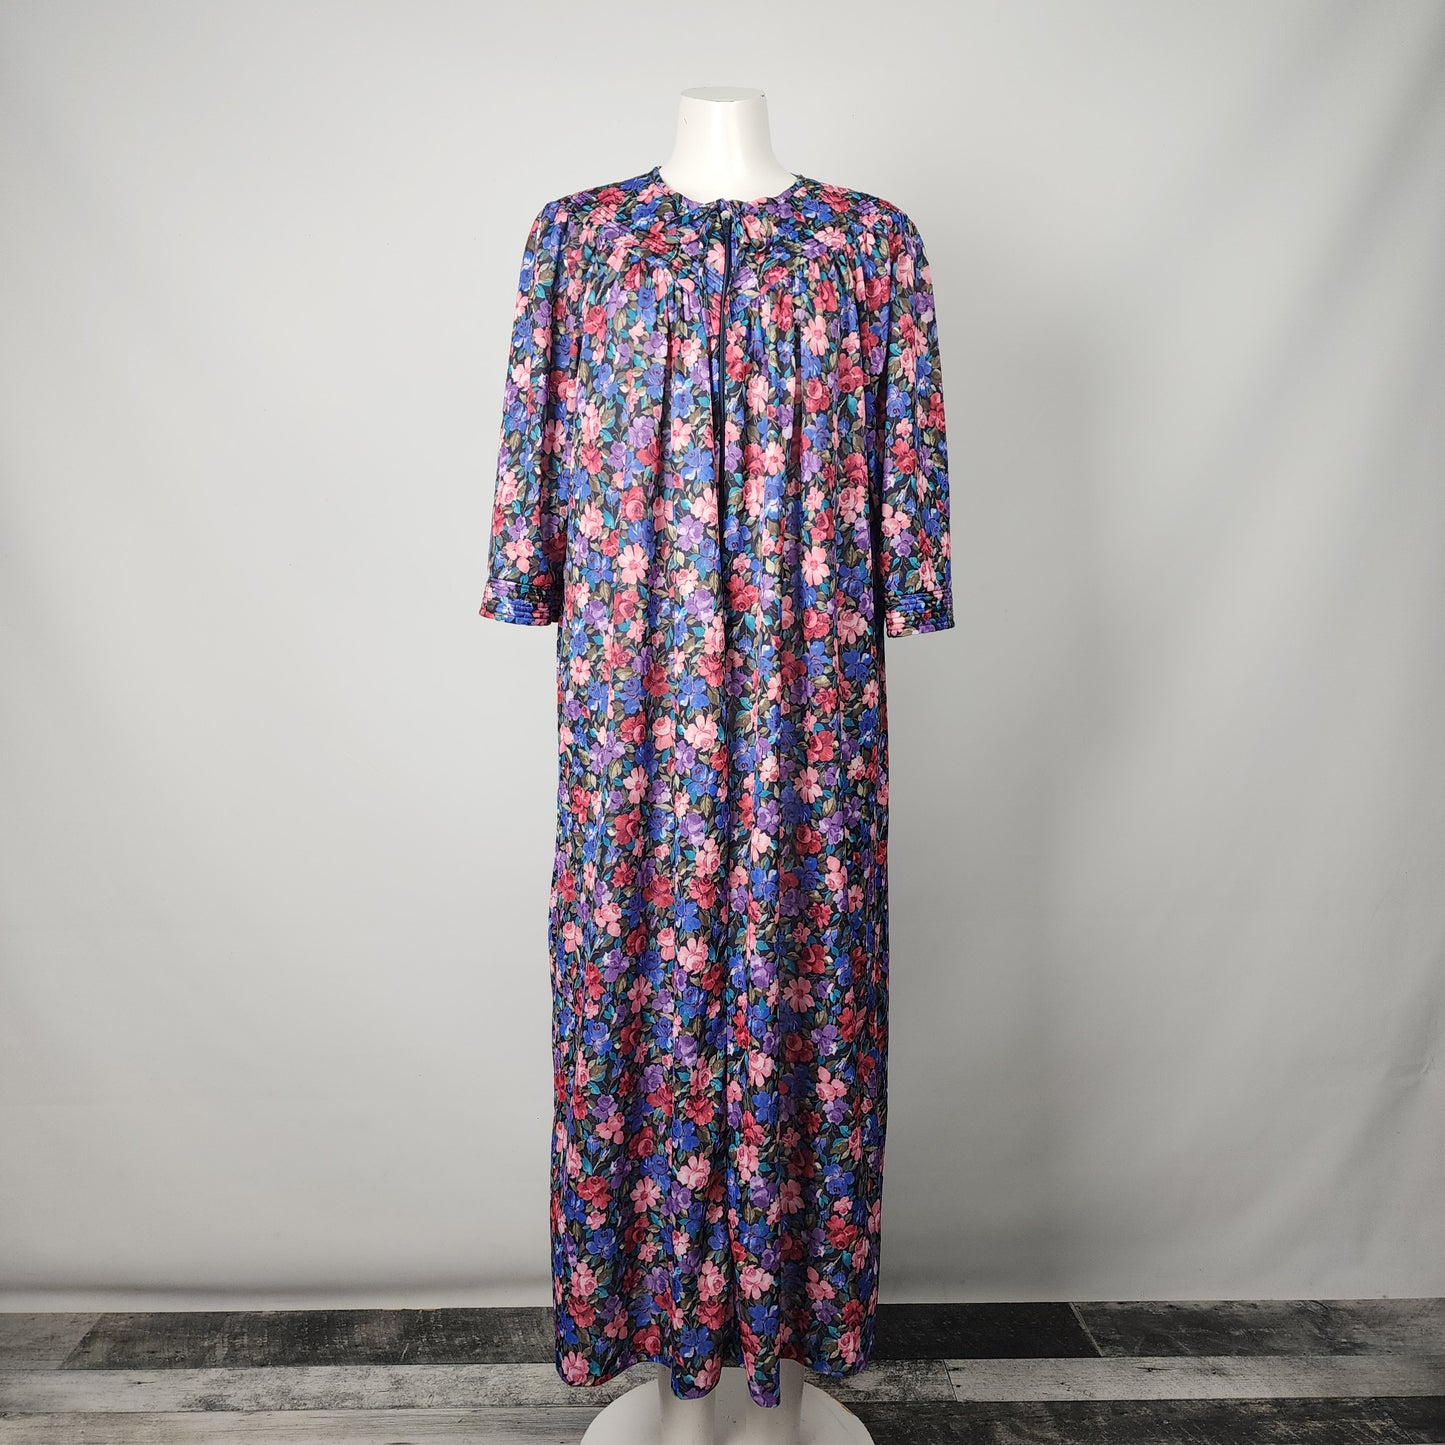 Vintage Carny G Floral Print Night Gown Dress Size M/L